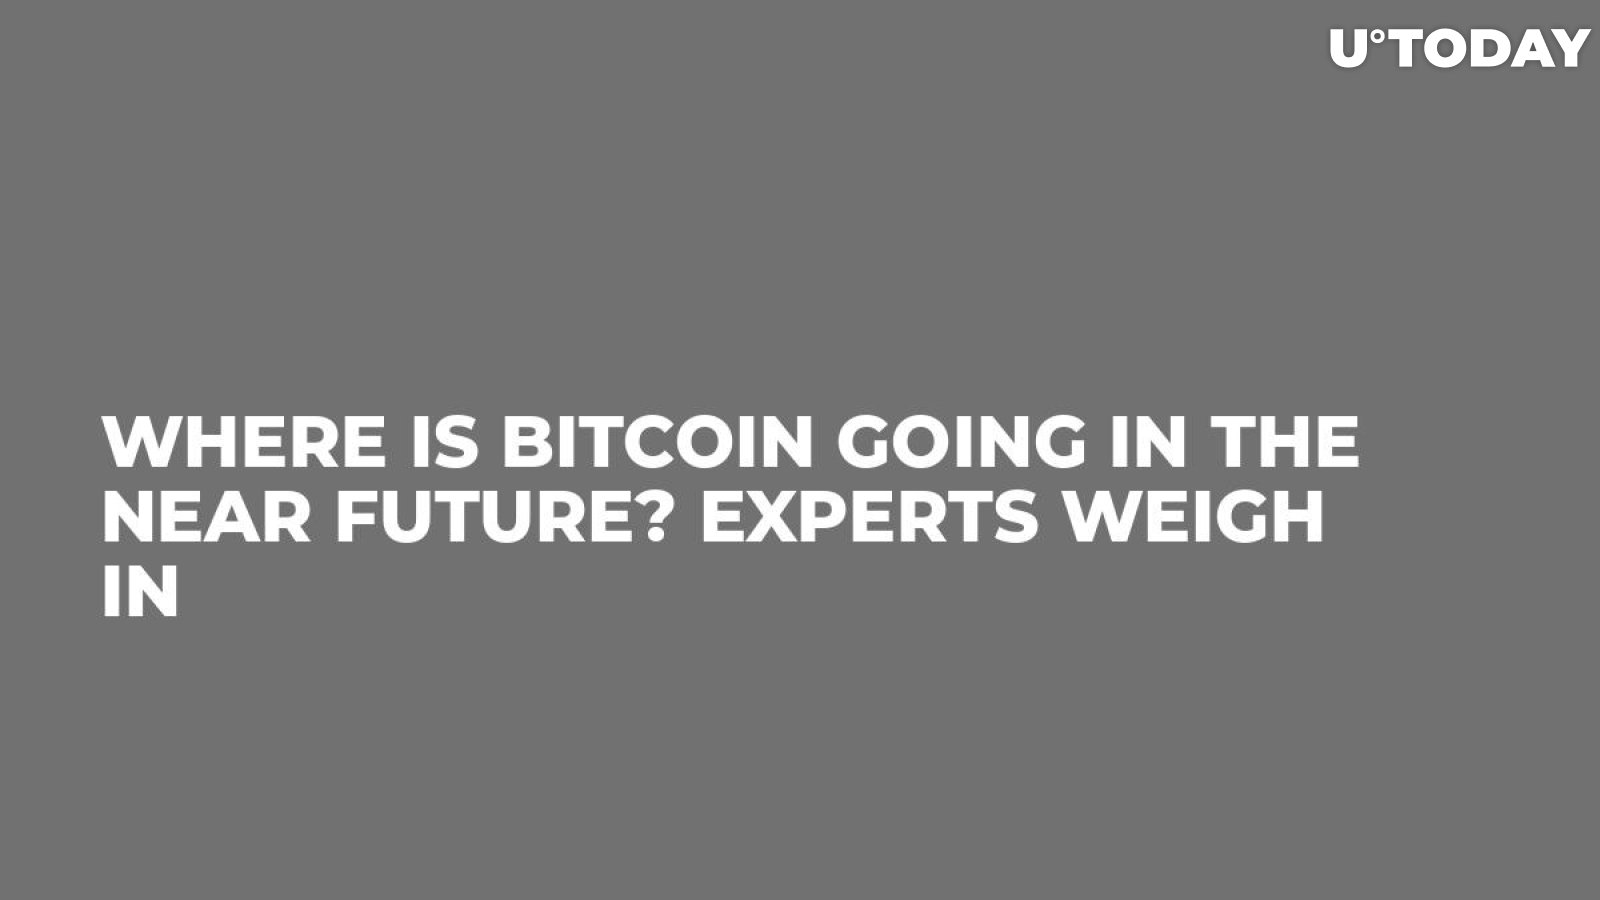 Where Is Bitcoin Going in the Near Future? Experts Weigh In